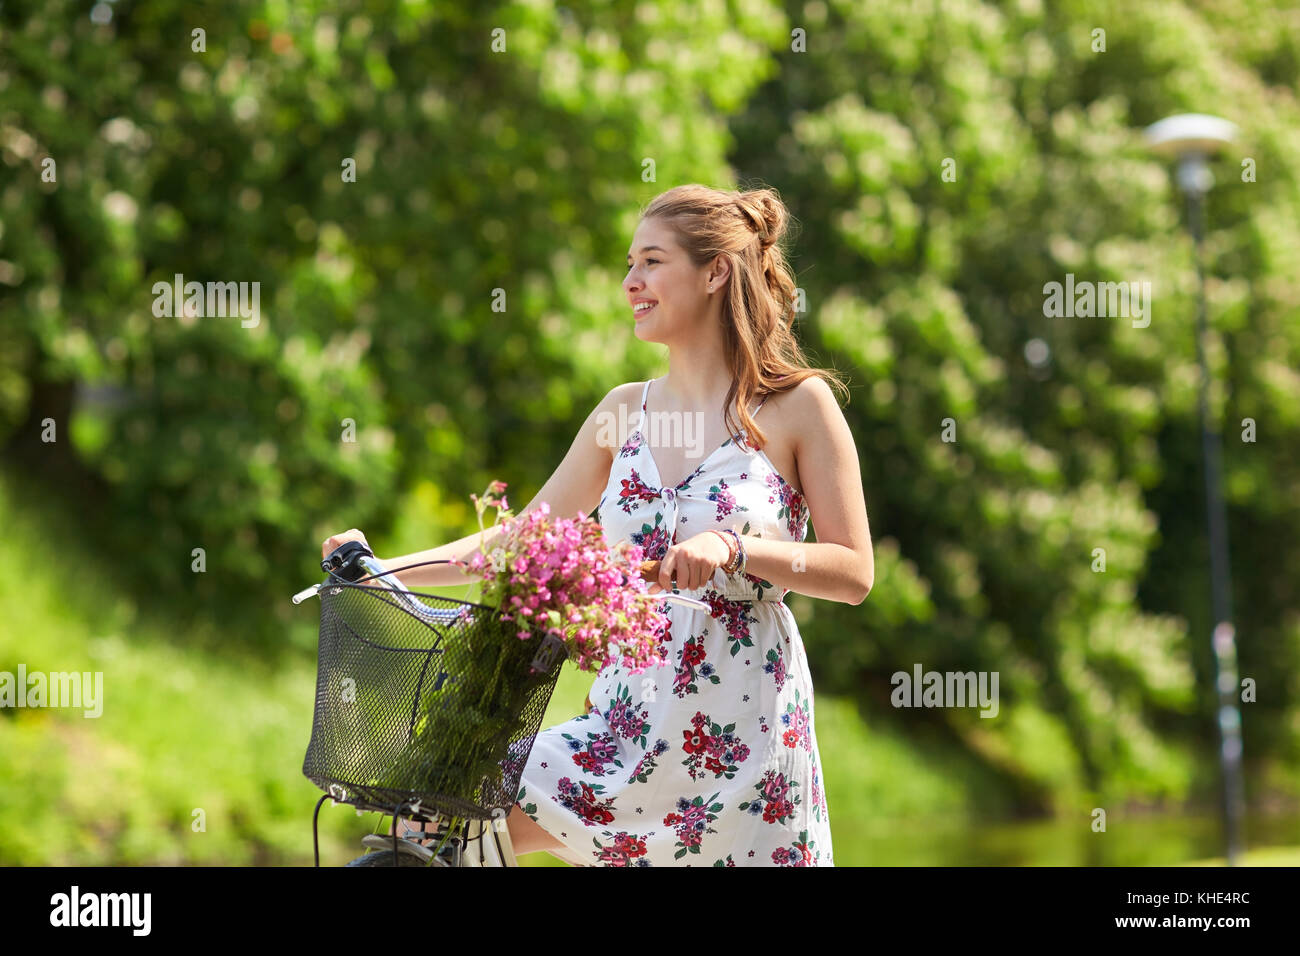 happy woman riding fixie bicycle in summer park Stock Photo